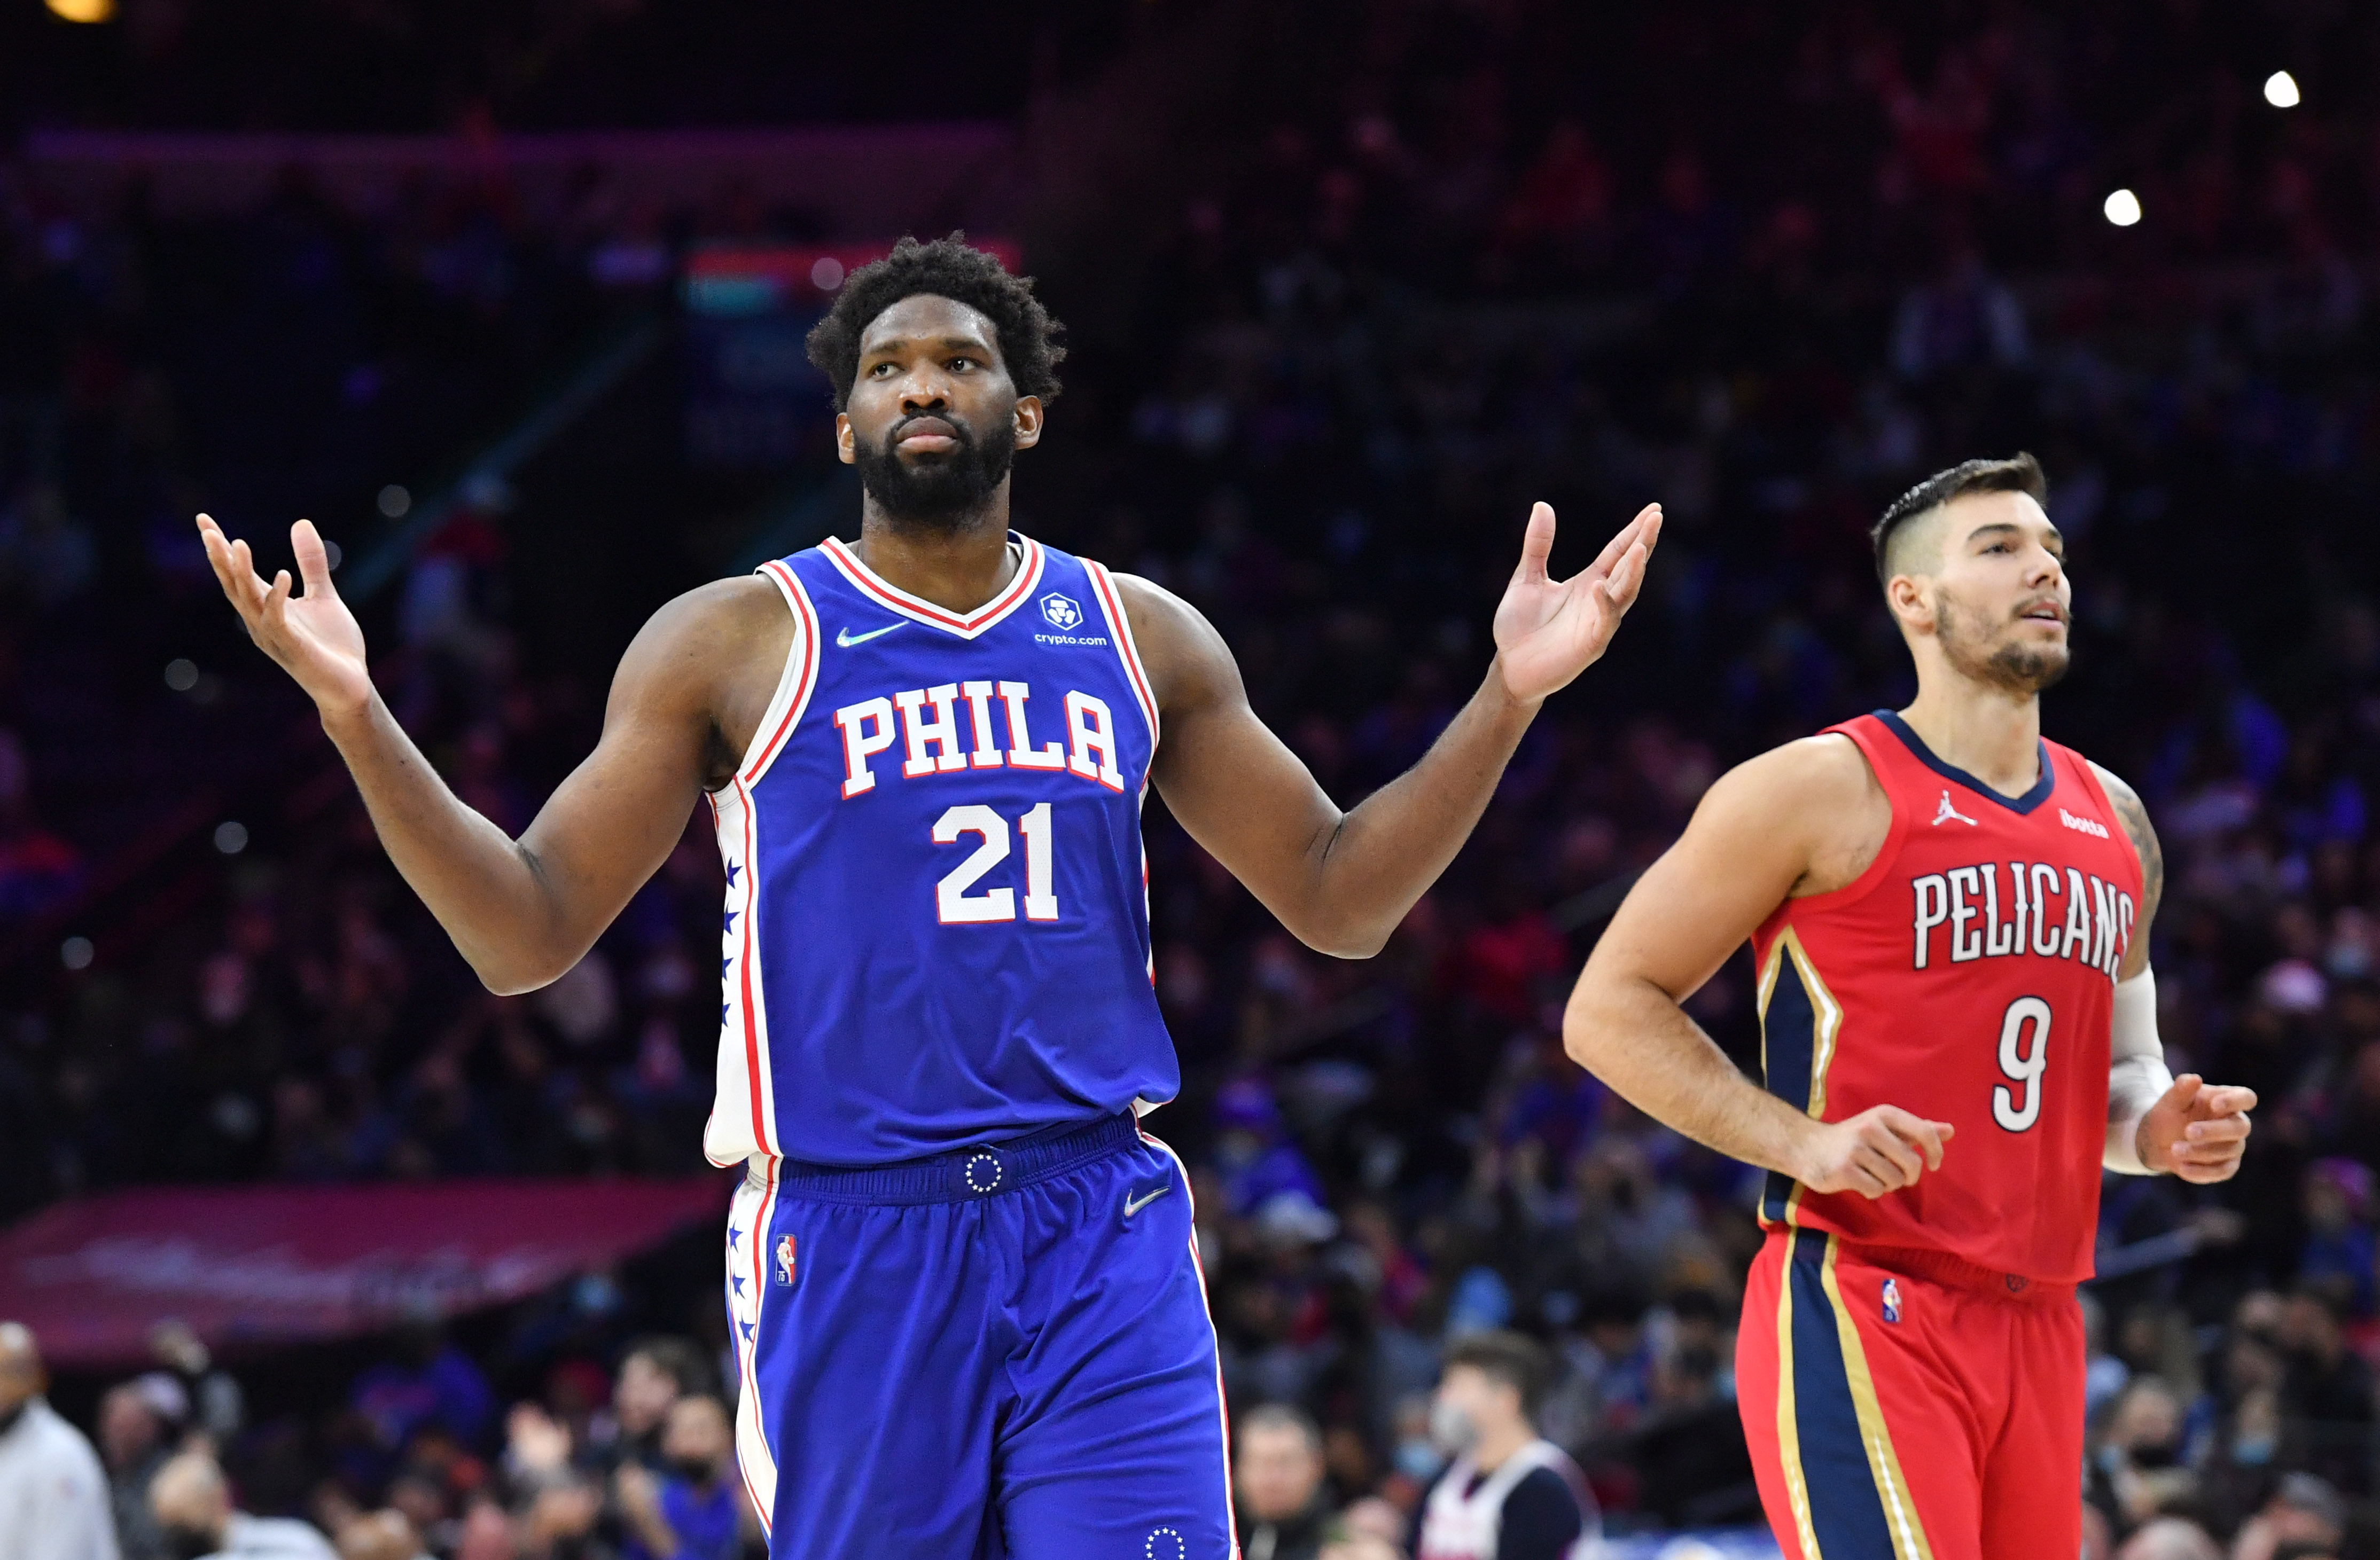 Philadelphia 76ers center Joel Embiid (21) reacts after making a packet against the New Orleans Pelicans during the fourth quarter at Wells Fargo Center.